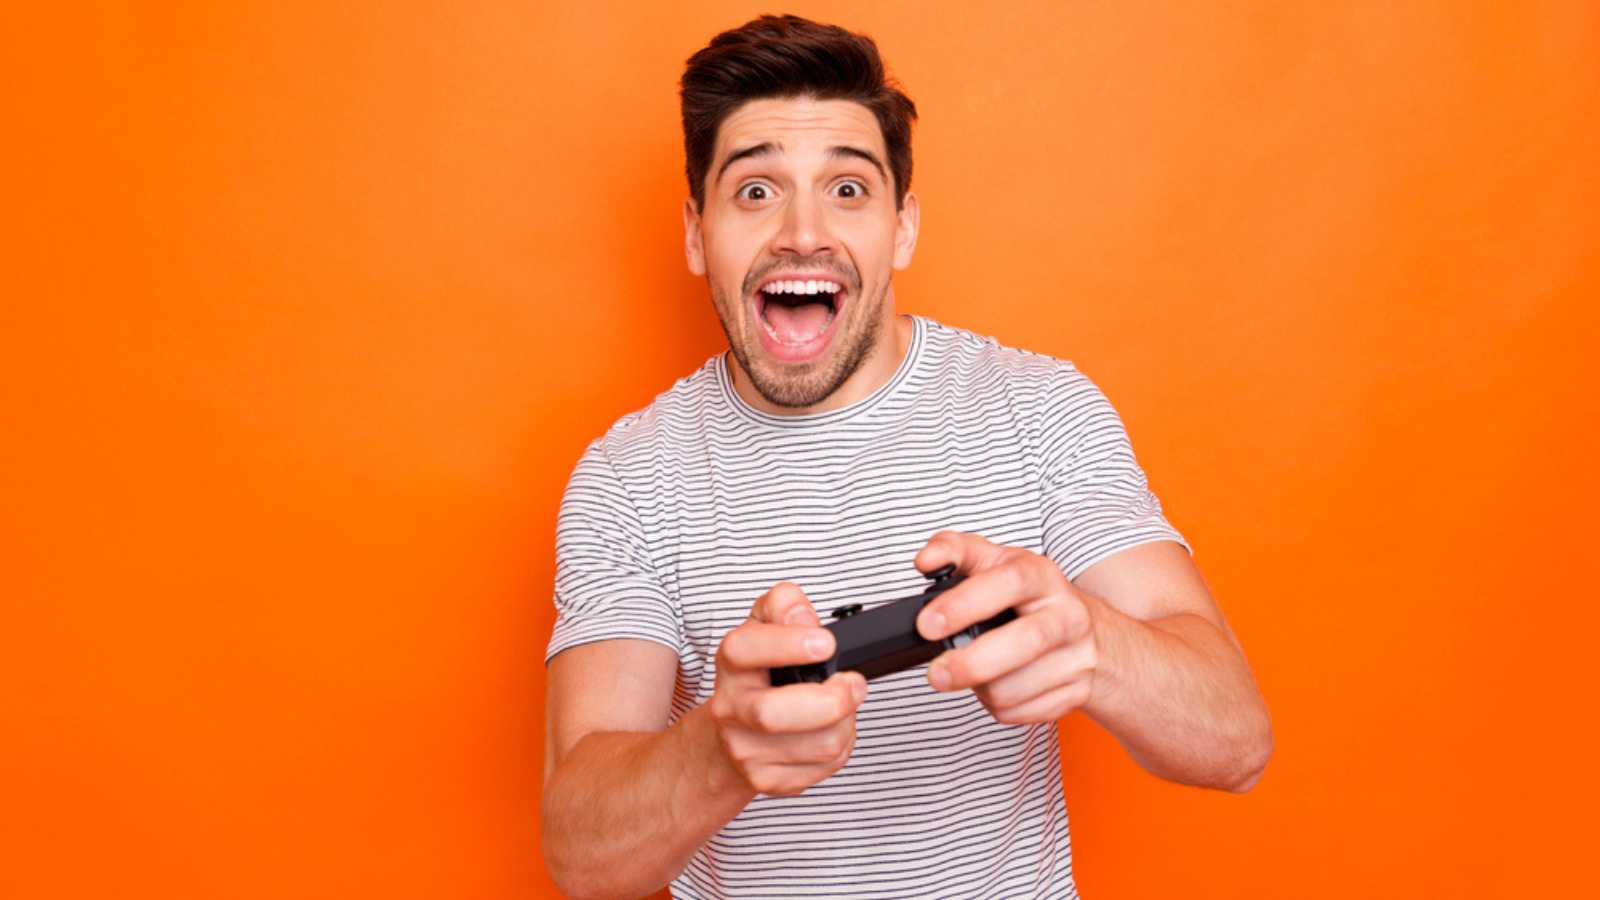 Excited man playing video game